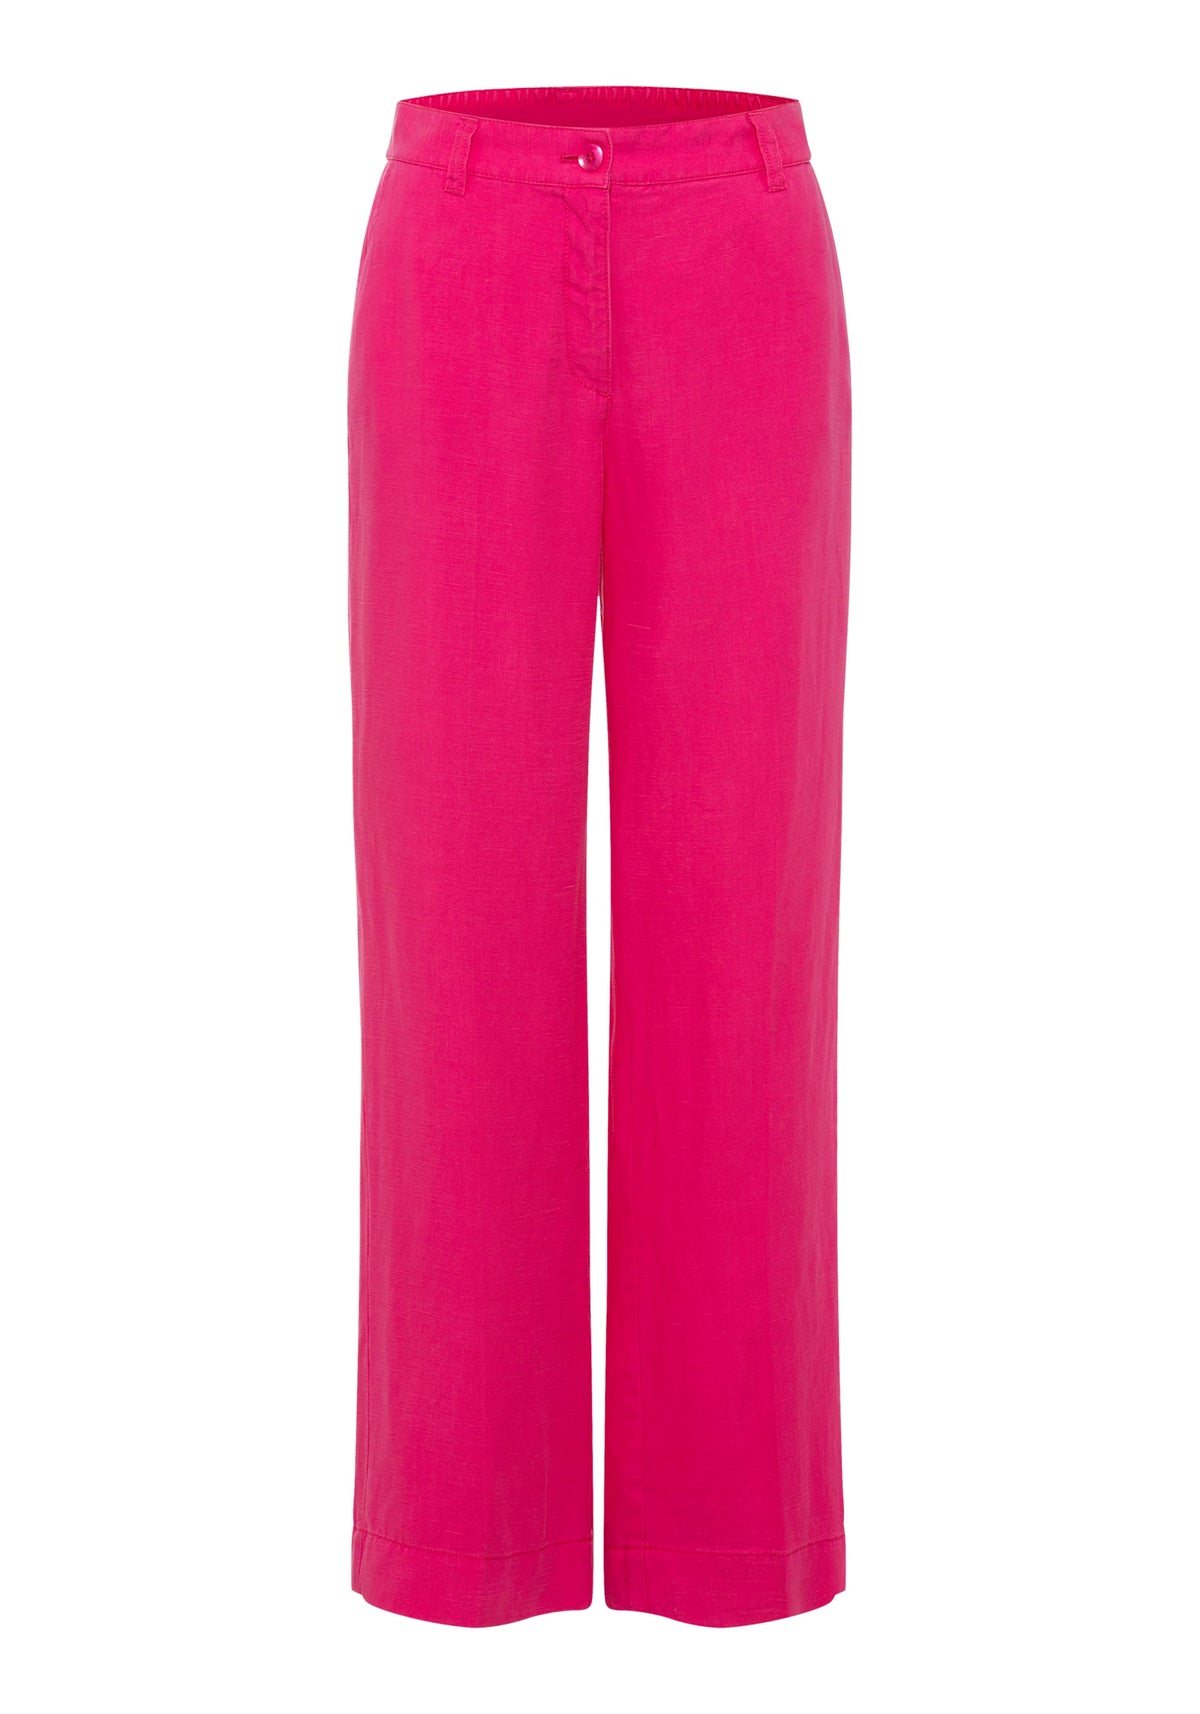 Anna Fit Wide Leg Linen Blend Trousers containing TENCEL™ Lyocell